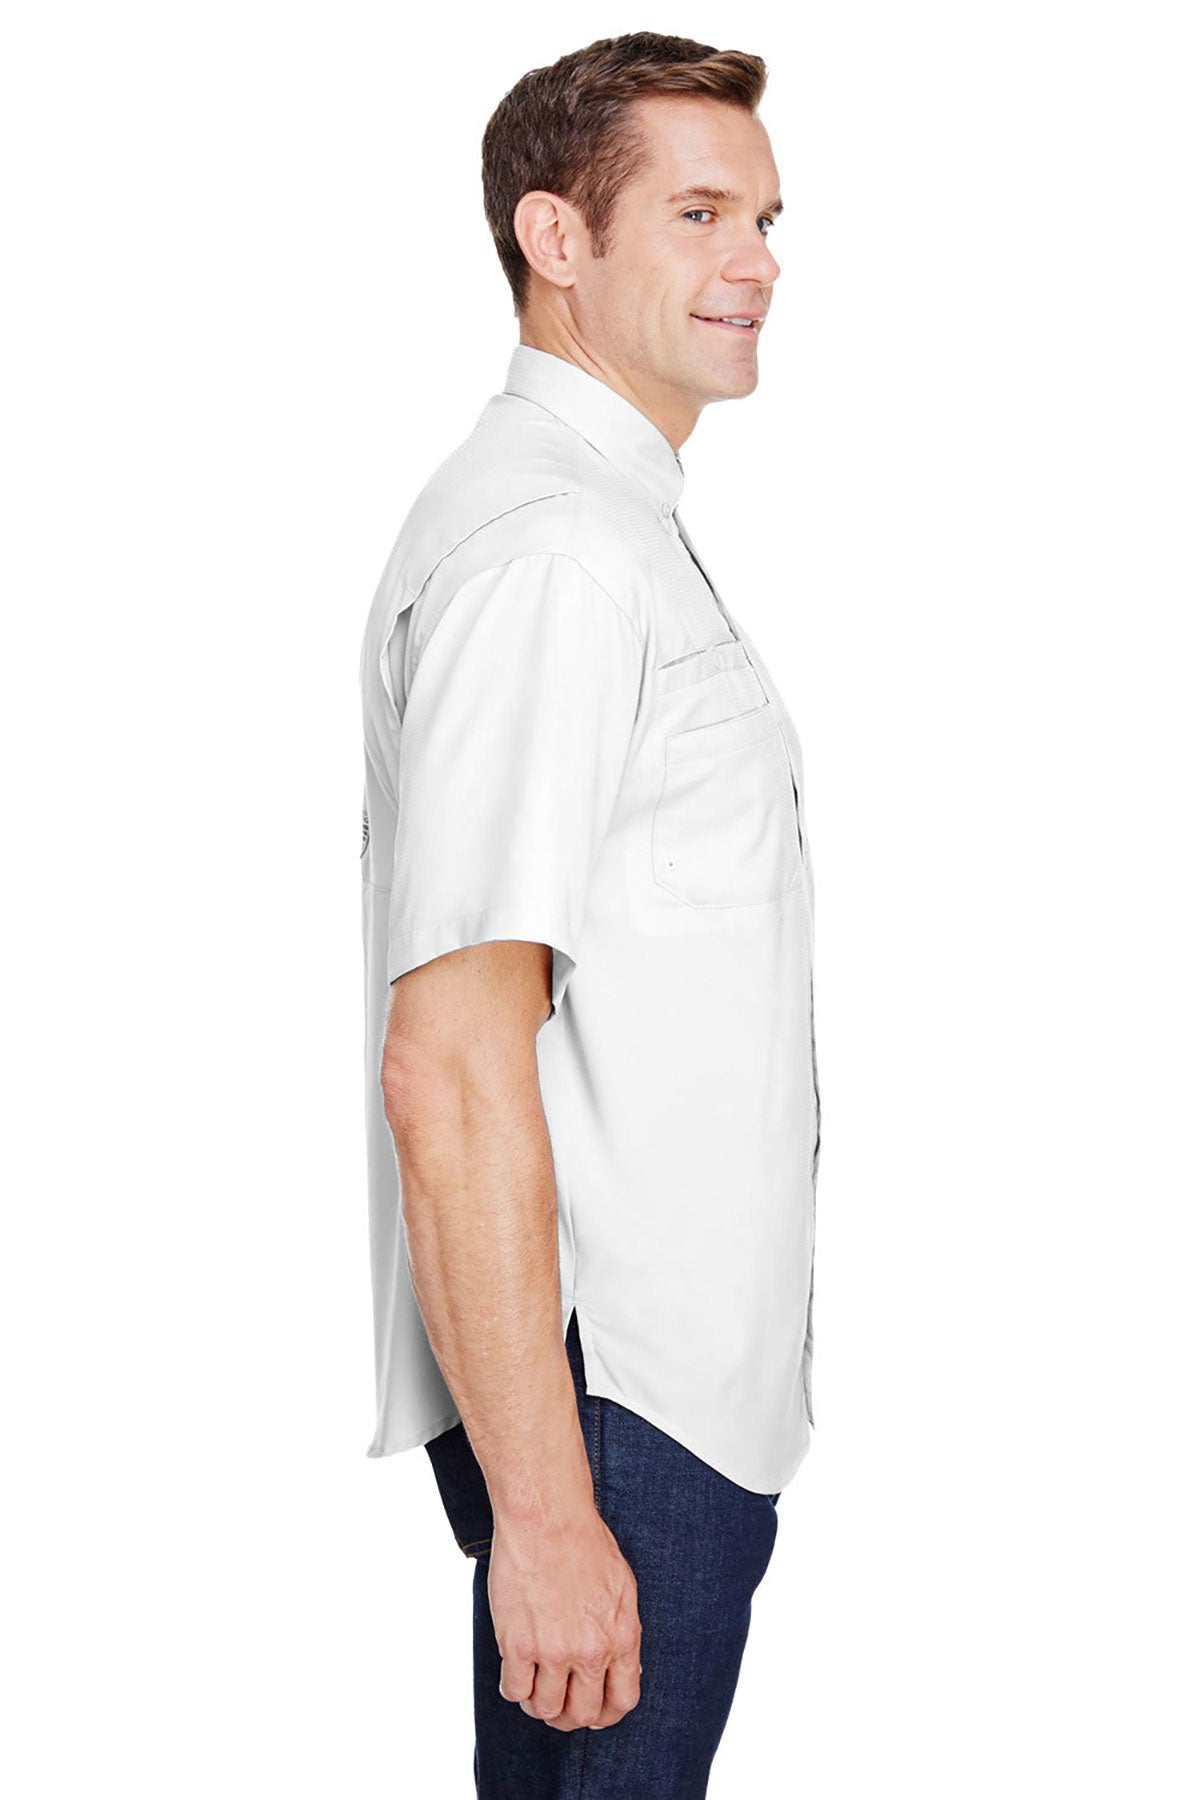 Columbia Tamiami II Short Sleeve Shirt, White [GuidePoint Security]